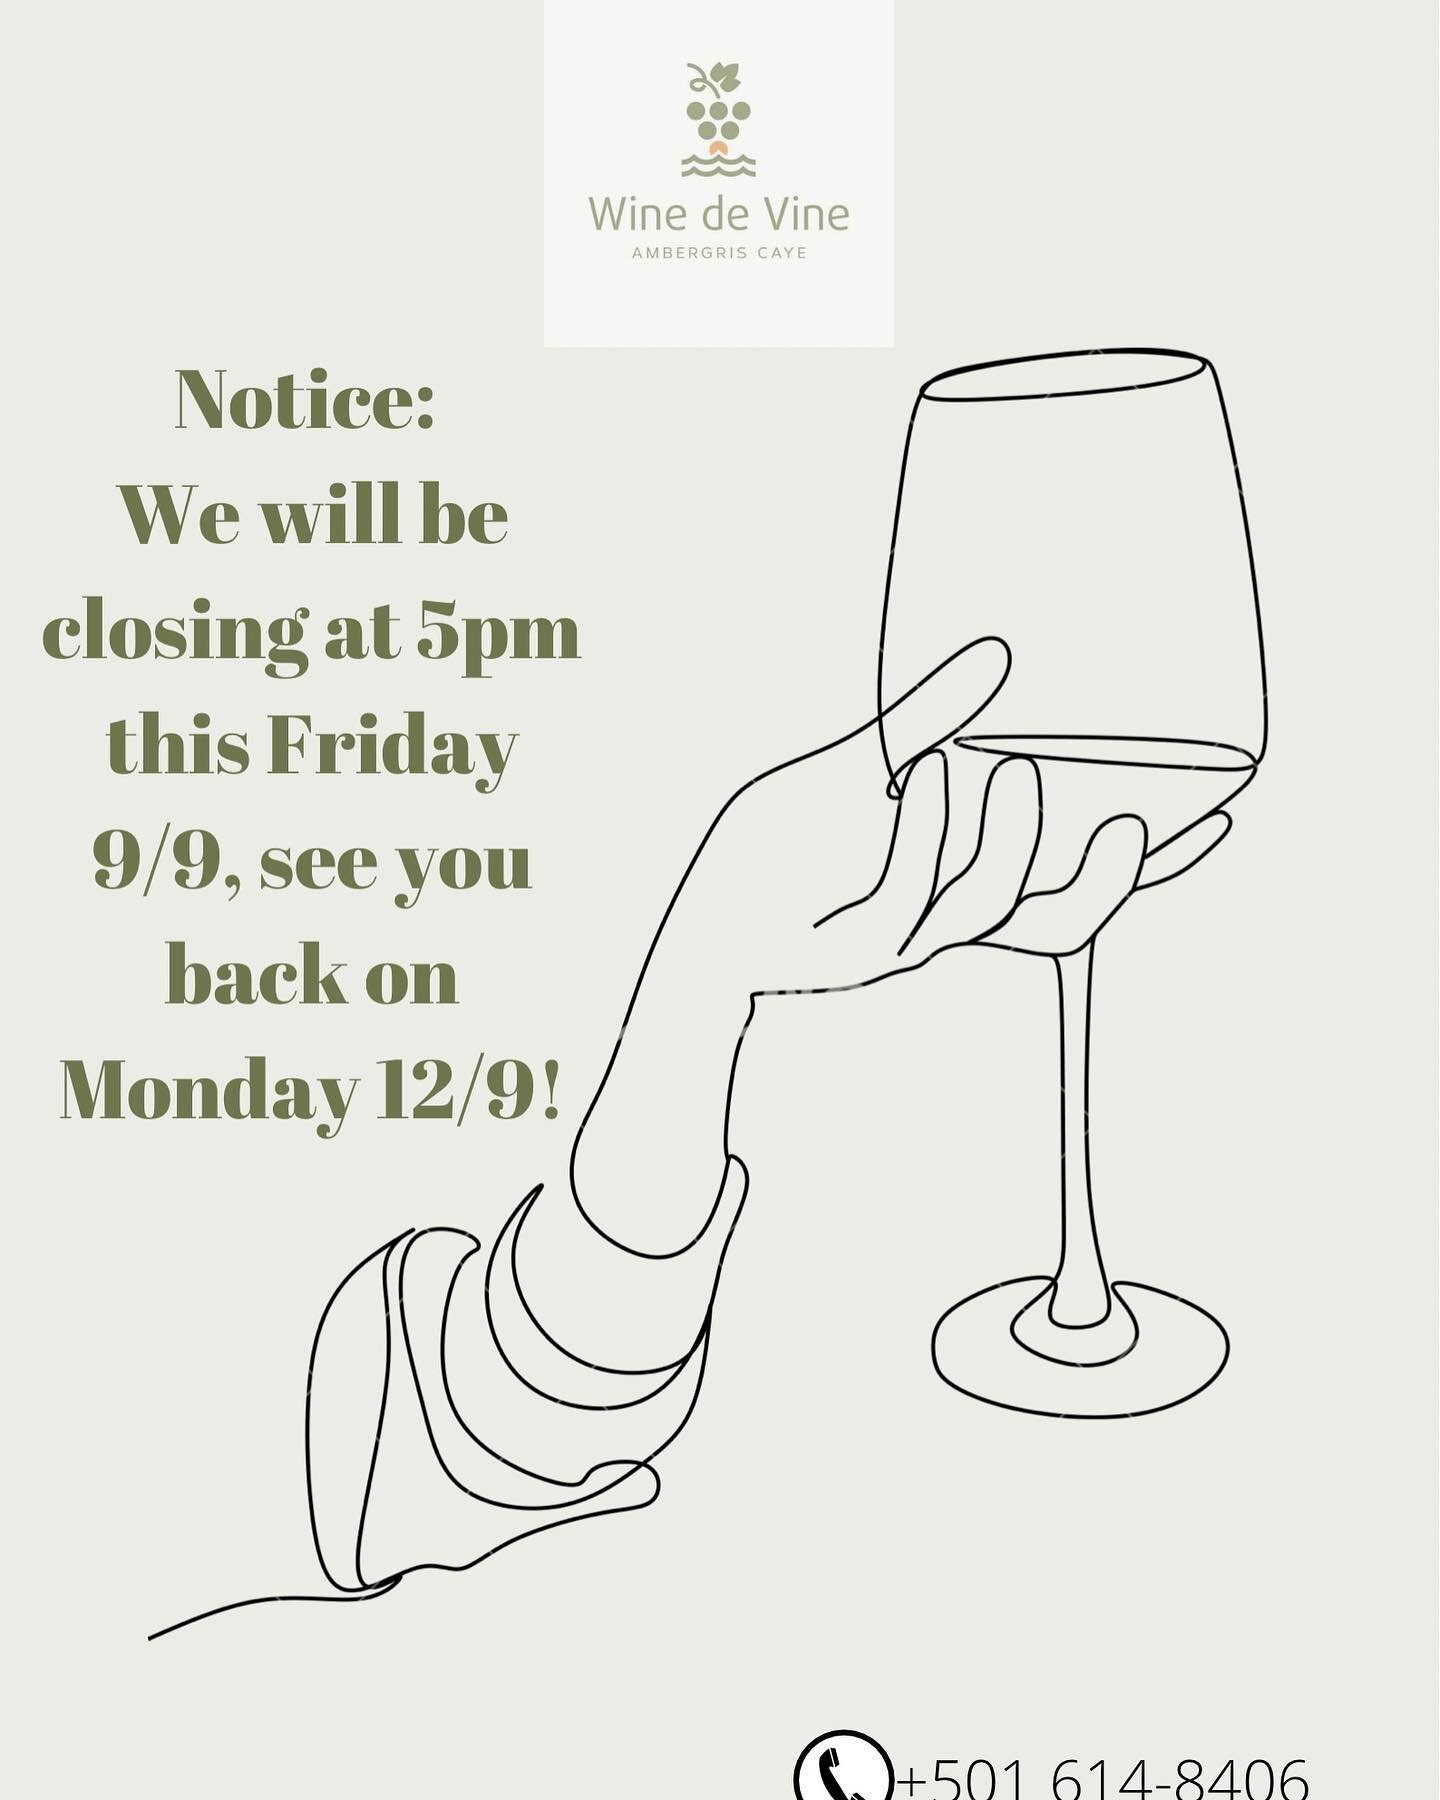 🇧🇿🇧🇿Septemba deh yah🇧🇿🇧🇿

Reminder: Friday September 9th we will
be closed from 5pm. Orders for wine and platters are still open. We reopen on Monday from 10am-8pm.

In September we are extra proud to be Belizean, comment your favorite song t